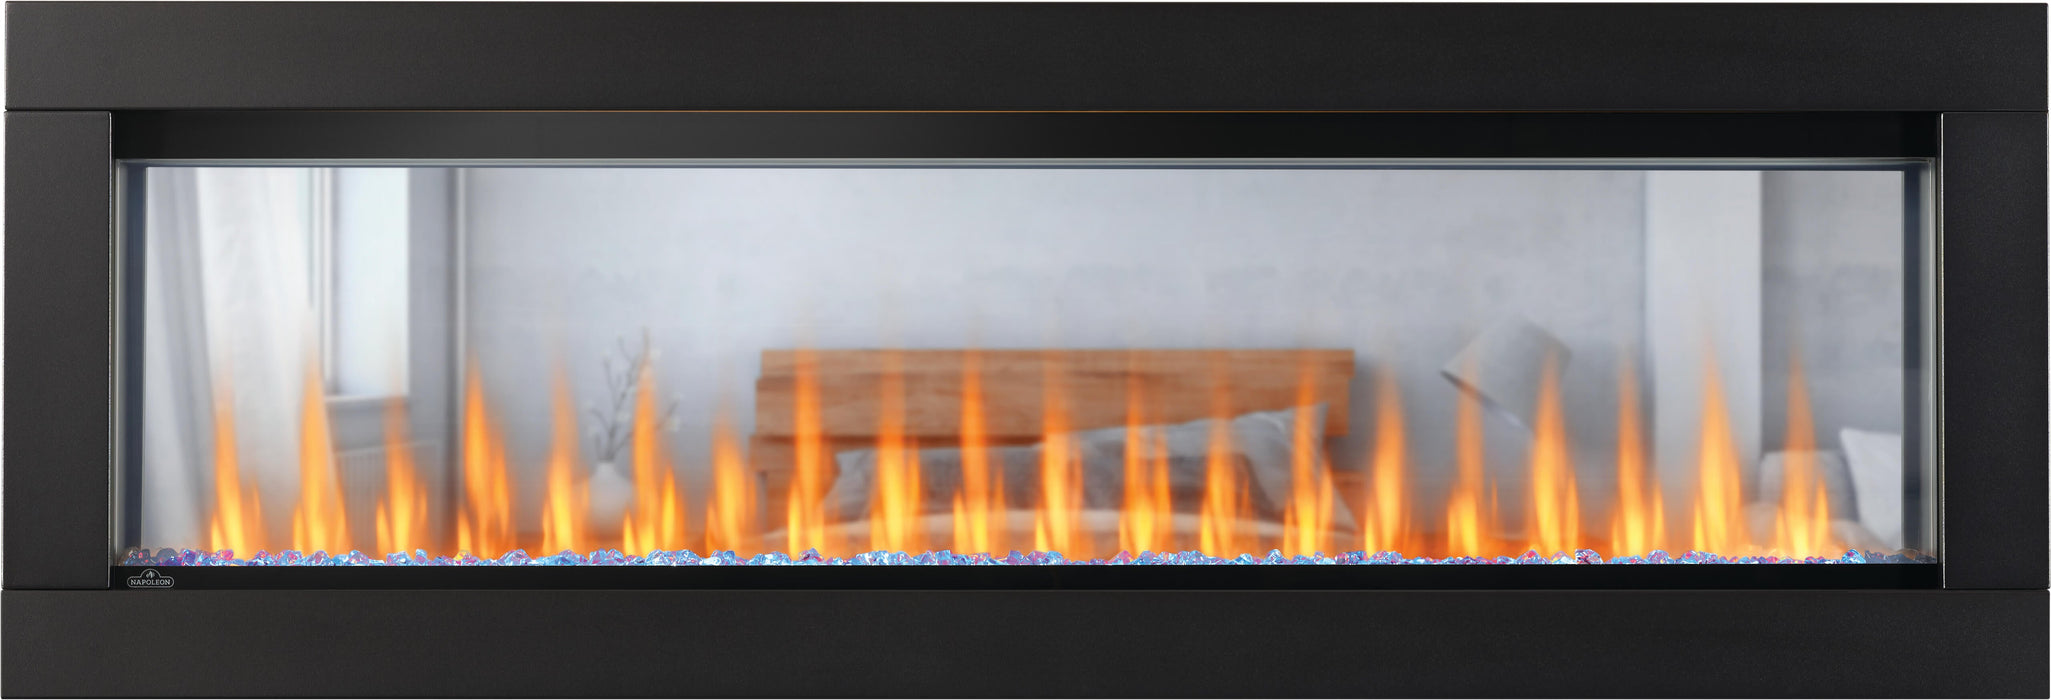 Napoleon Black Trim for 60-in CLEARion Elite Electric Fireplace - NEFBD60HE-DTRM